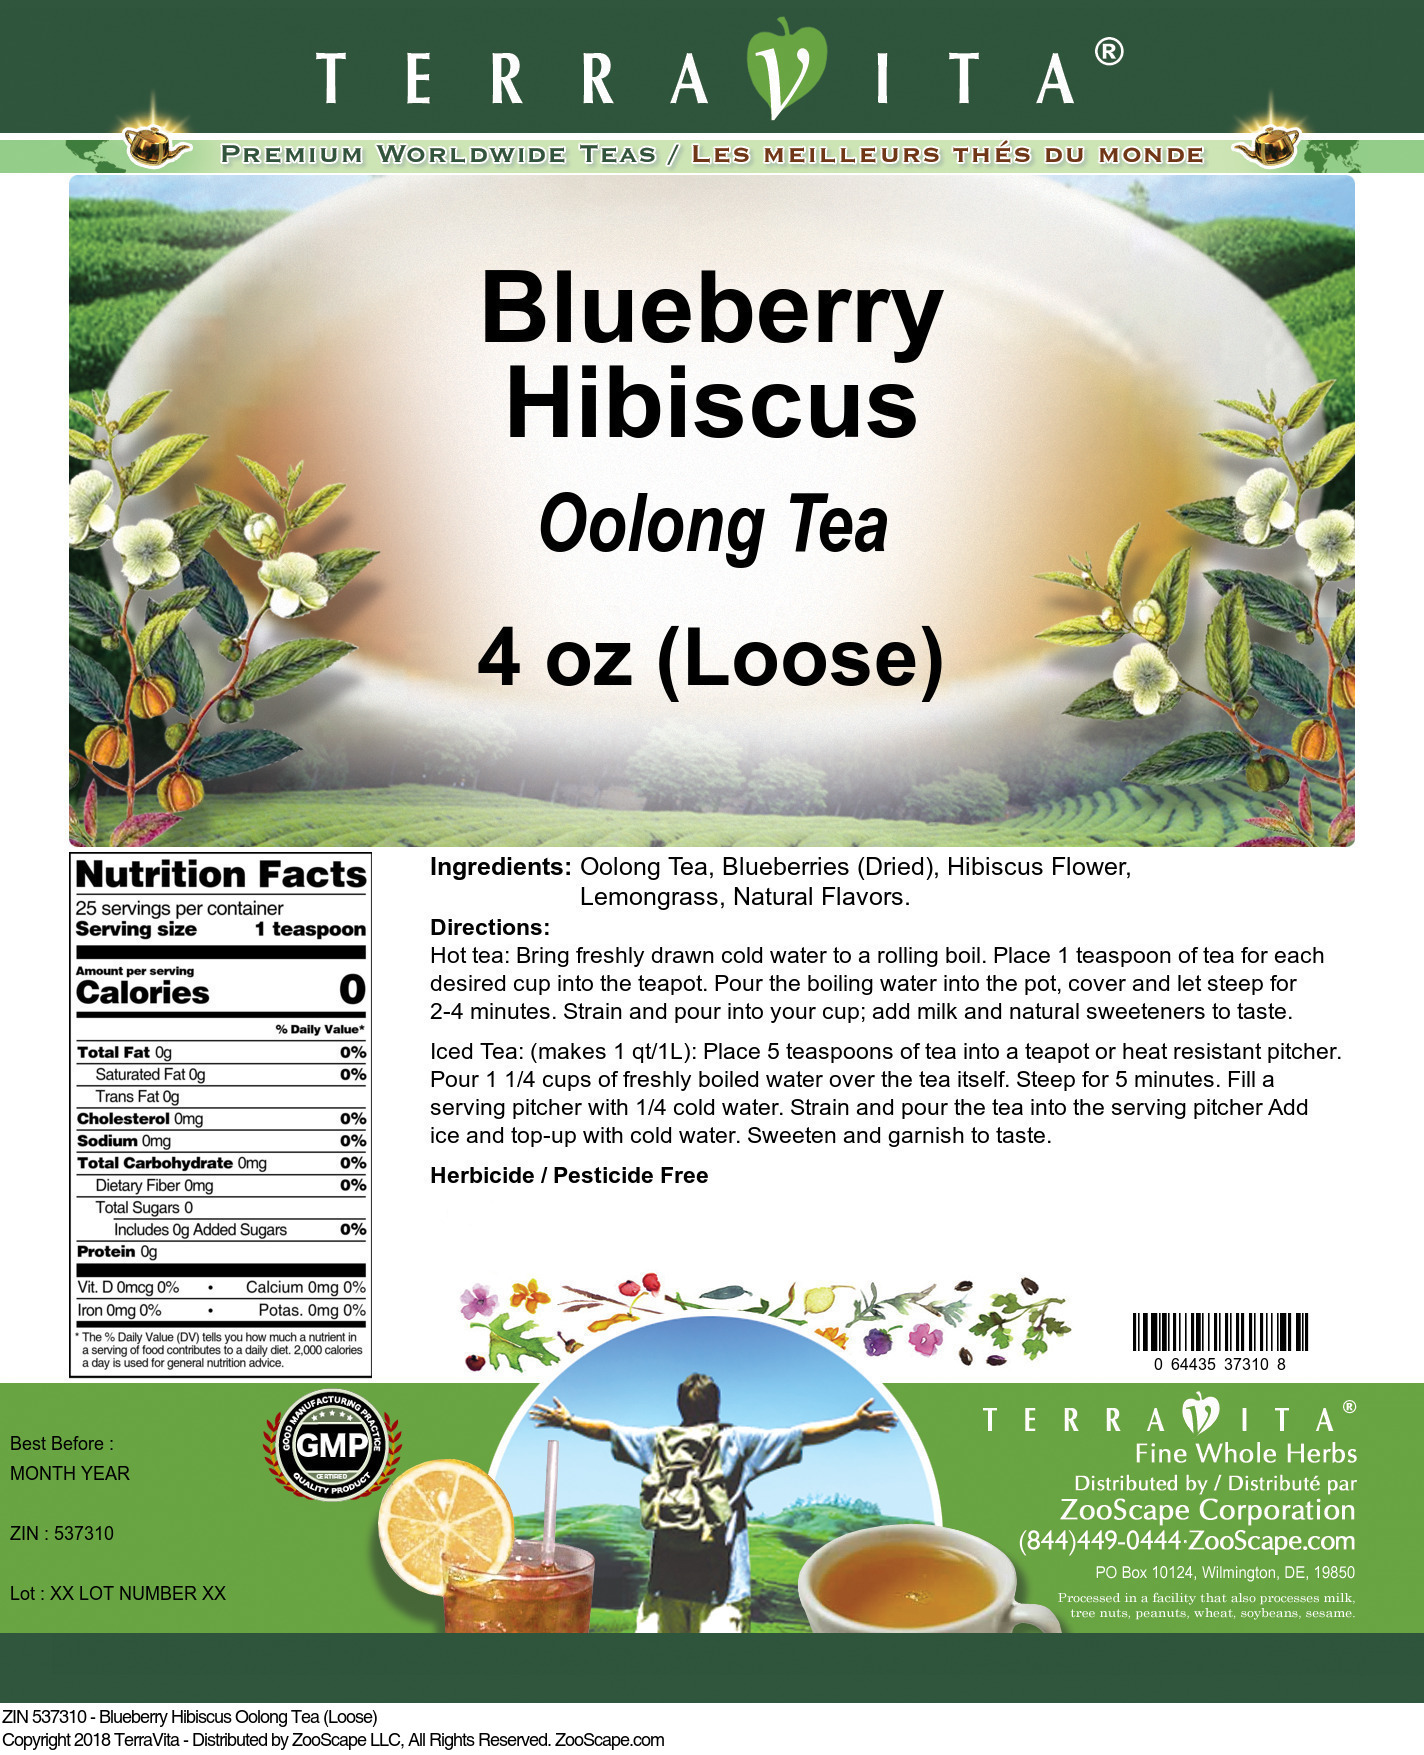 Blueberry Hibiscus Oolong Tea (Loose) - Label